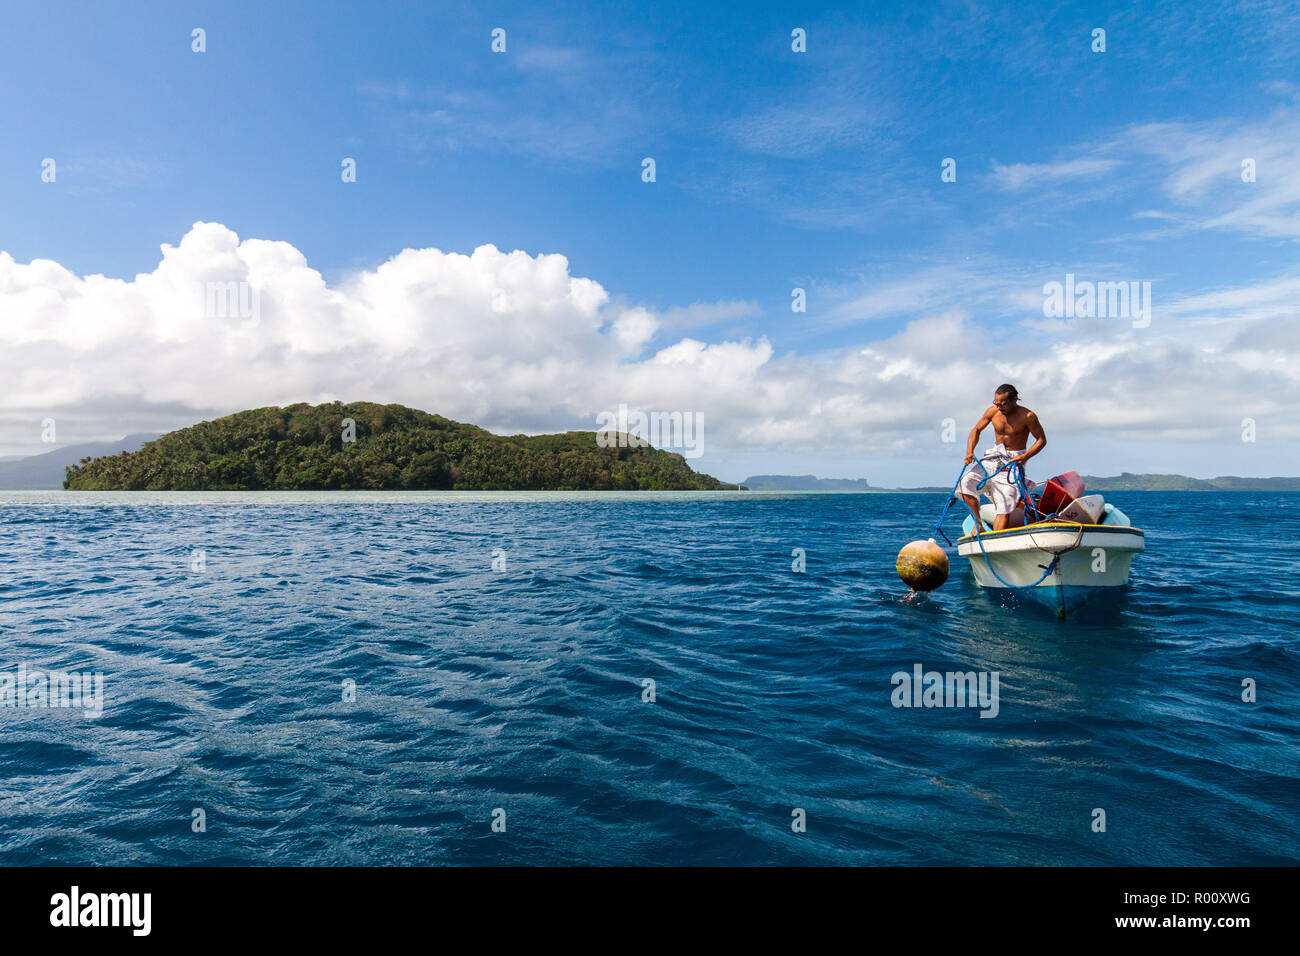 Local Micronesian man in a fishing boat pulls a buoy out of the water near Nan Madol, Pohnpei island, Federated States of Micronesia. Stock Photo